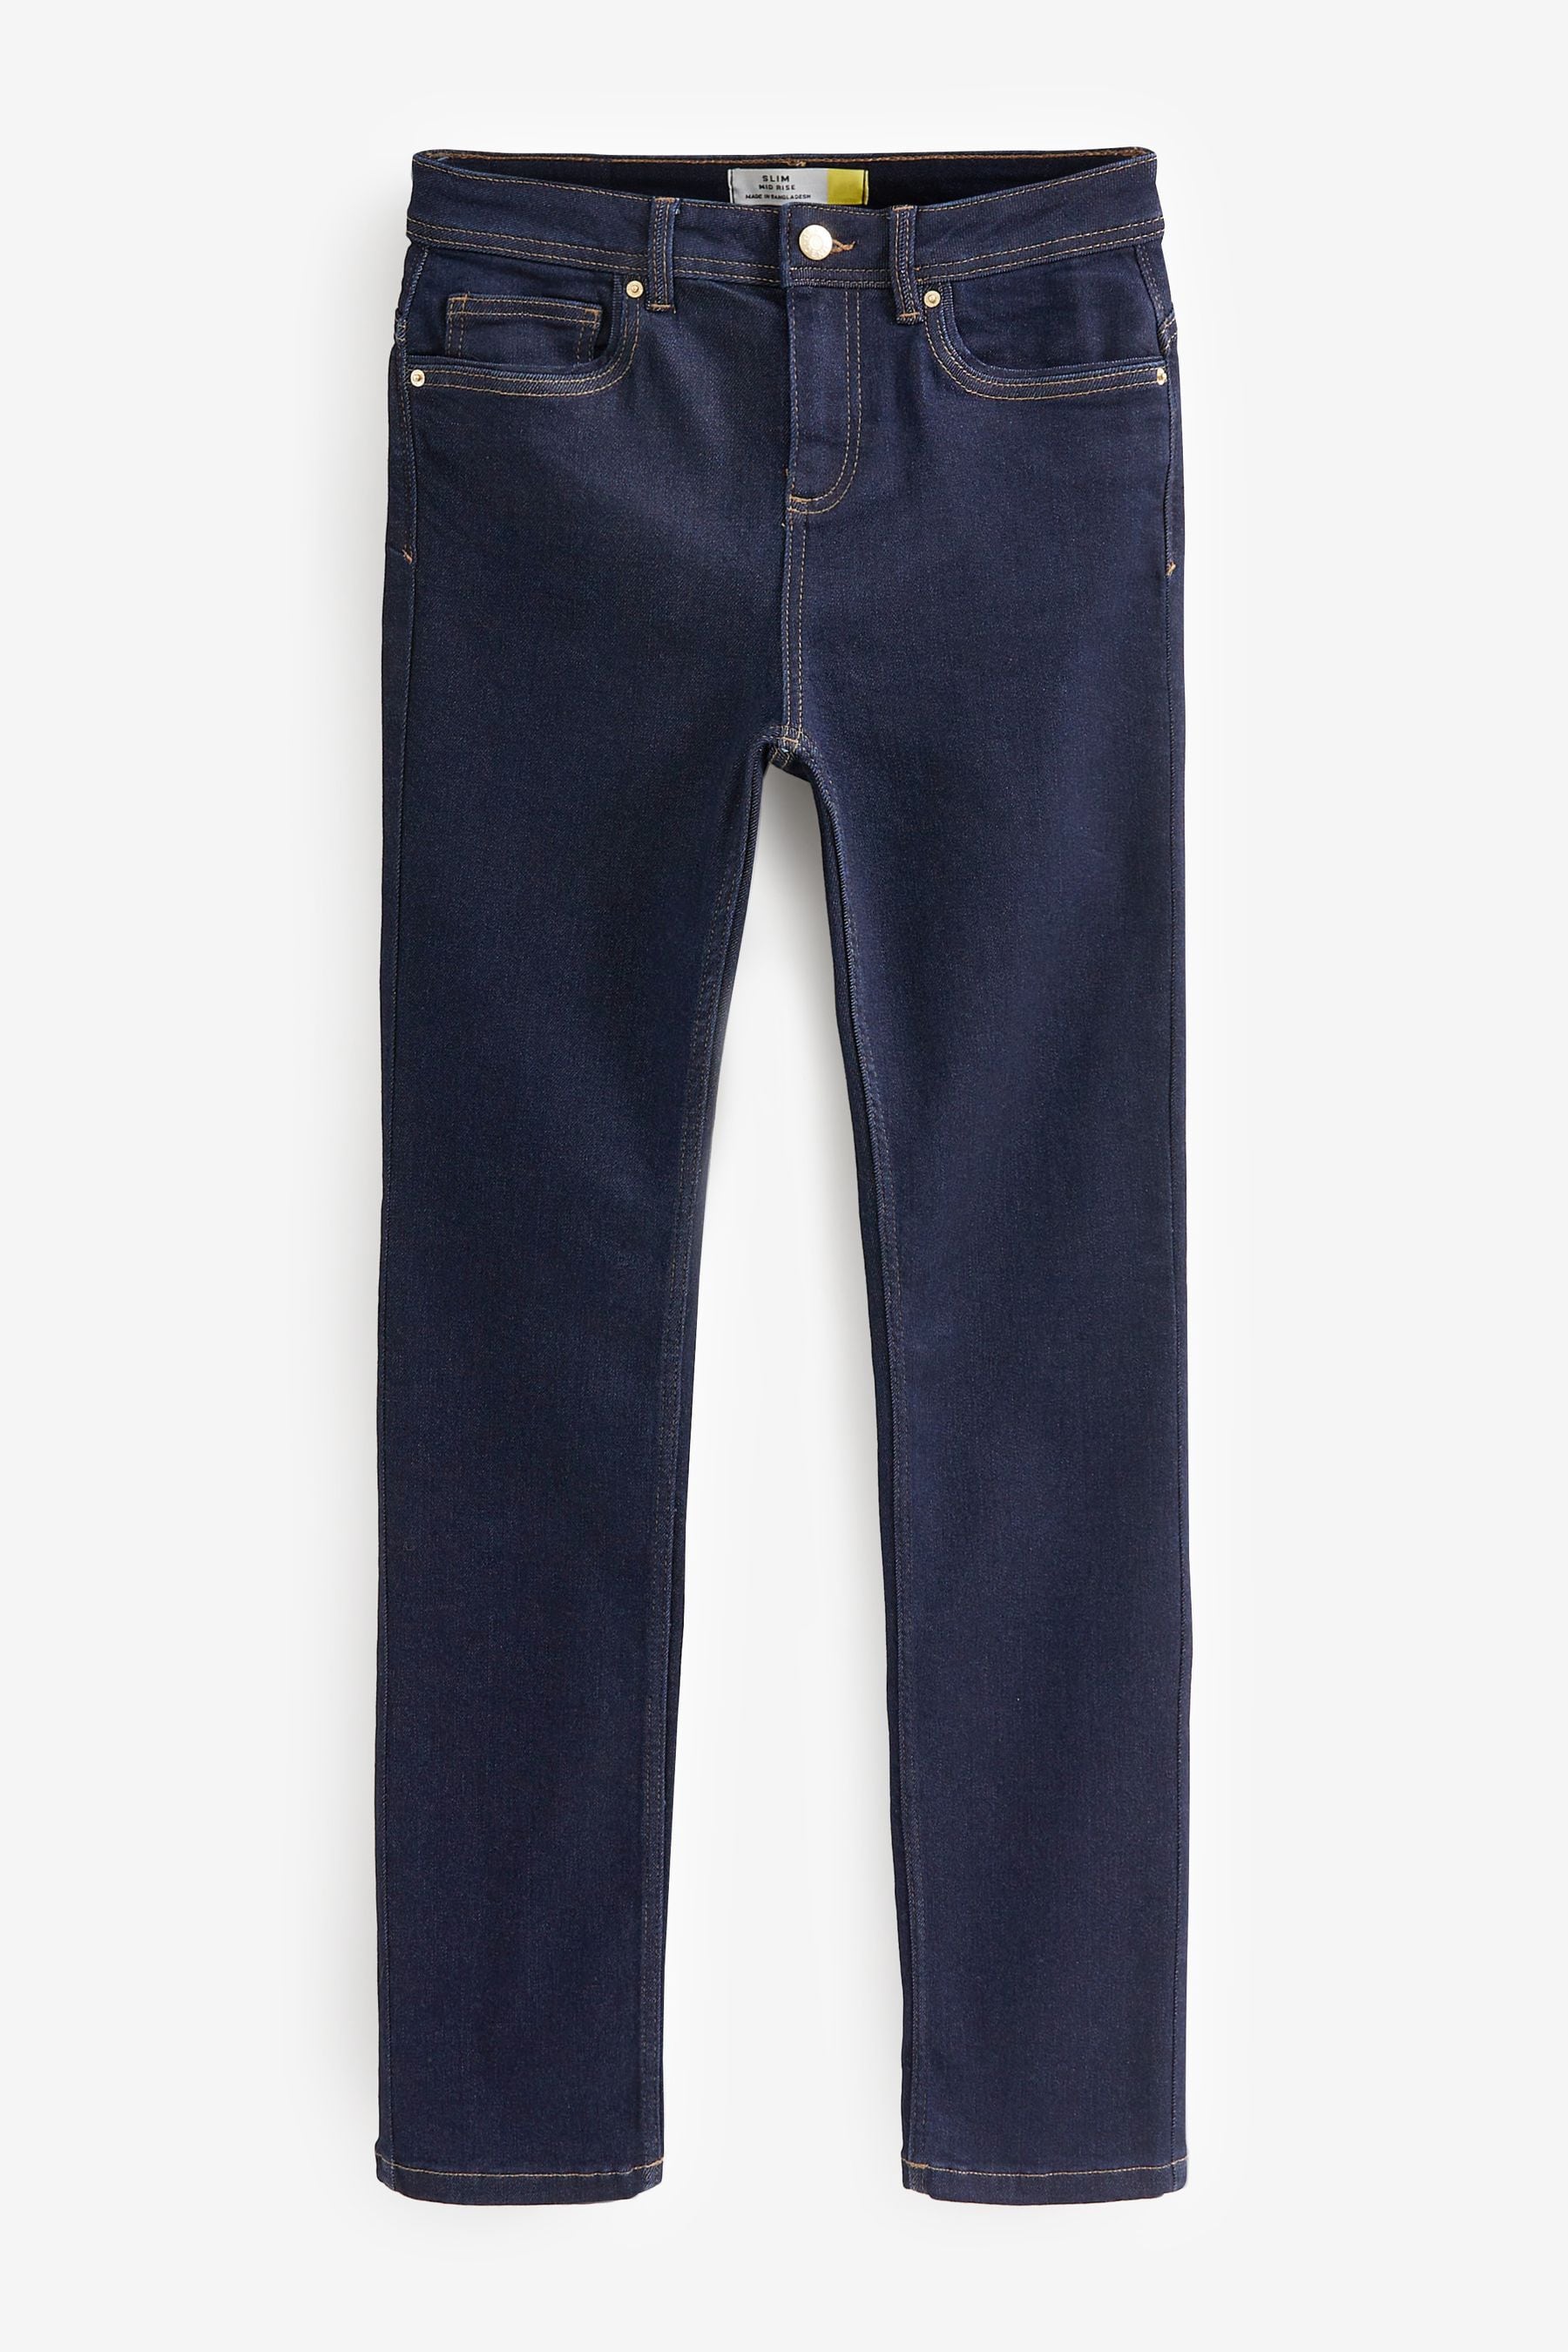 Buy Slim Supersoft Jeans from Next Ireland